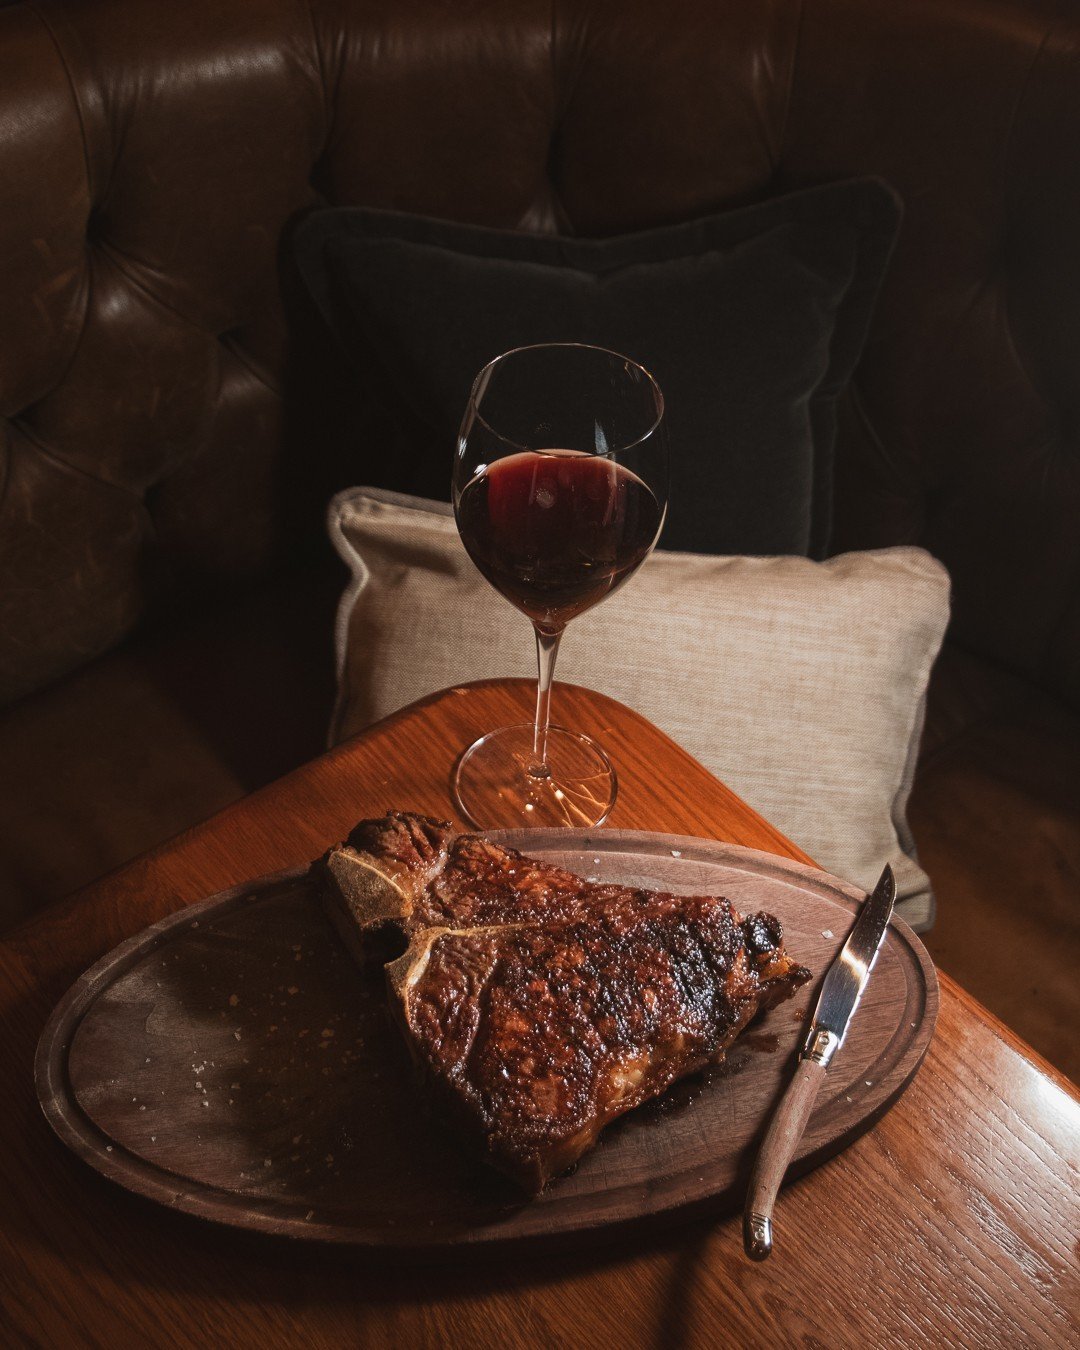 There&rsquo;s no better night than a steak night 🥩✨ 

Tap the link in our bio to book your table at Alpen Rose🌹

#AlpenRose #SchulsonCollective #nightout #nightout #finedining #dinnerdate #datenight